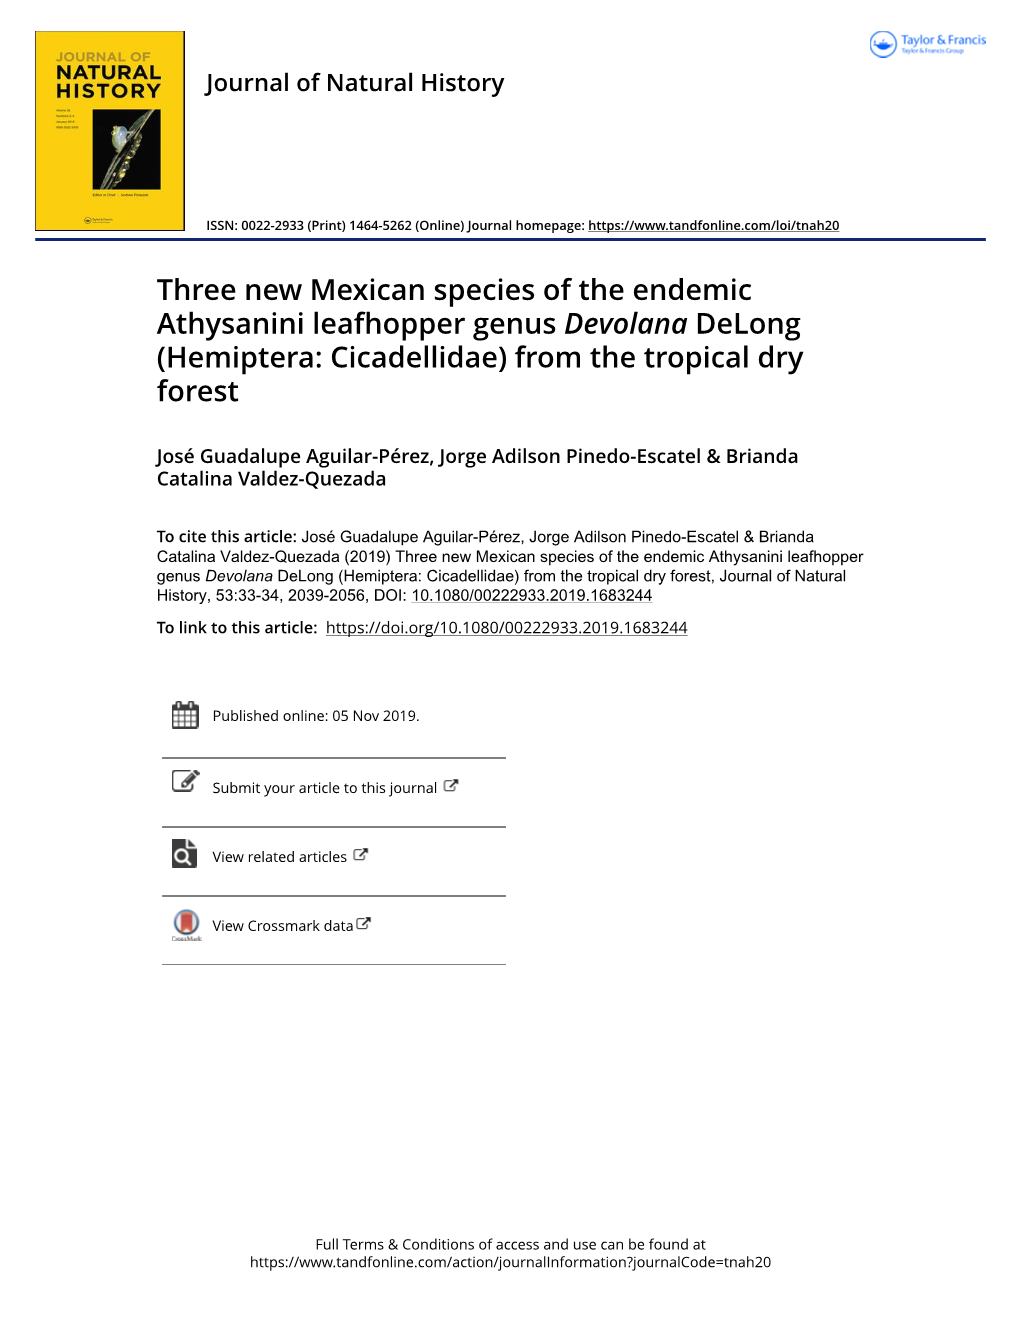 Three New Mexican Species of the Endemic Athysanini Leafhopper Genus Devolana Delong (Hemiptera: Cicadellidae) from the Tropical Dry Forest